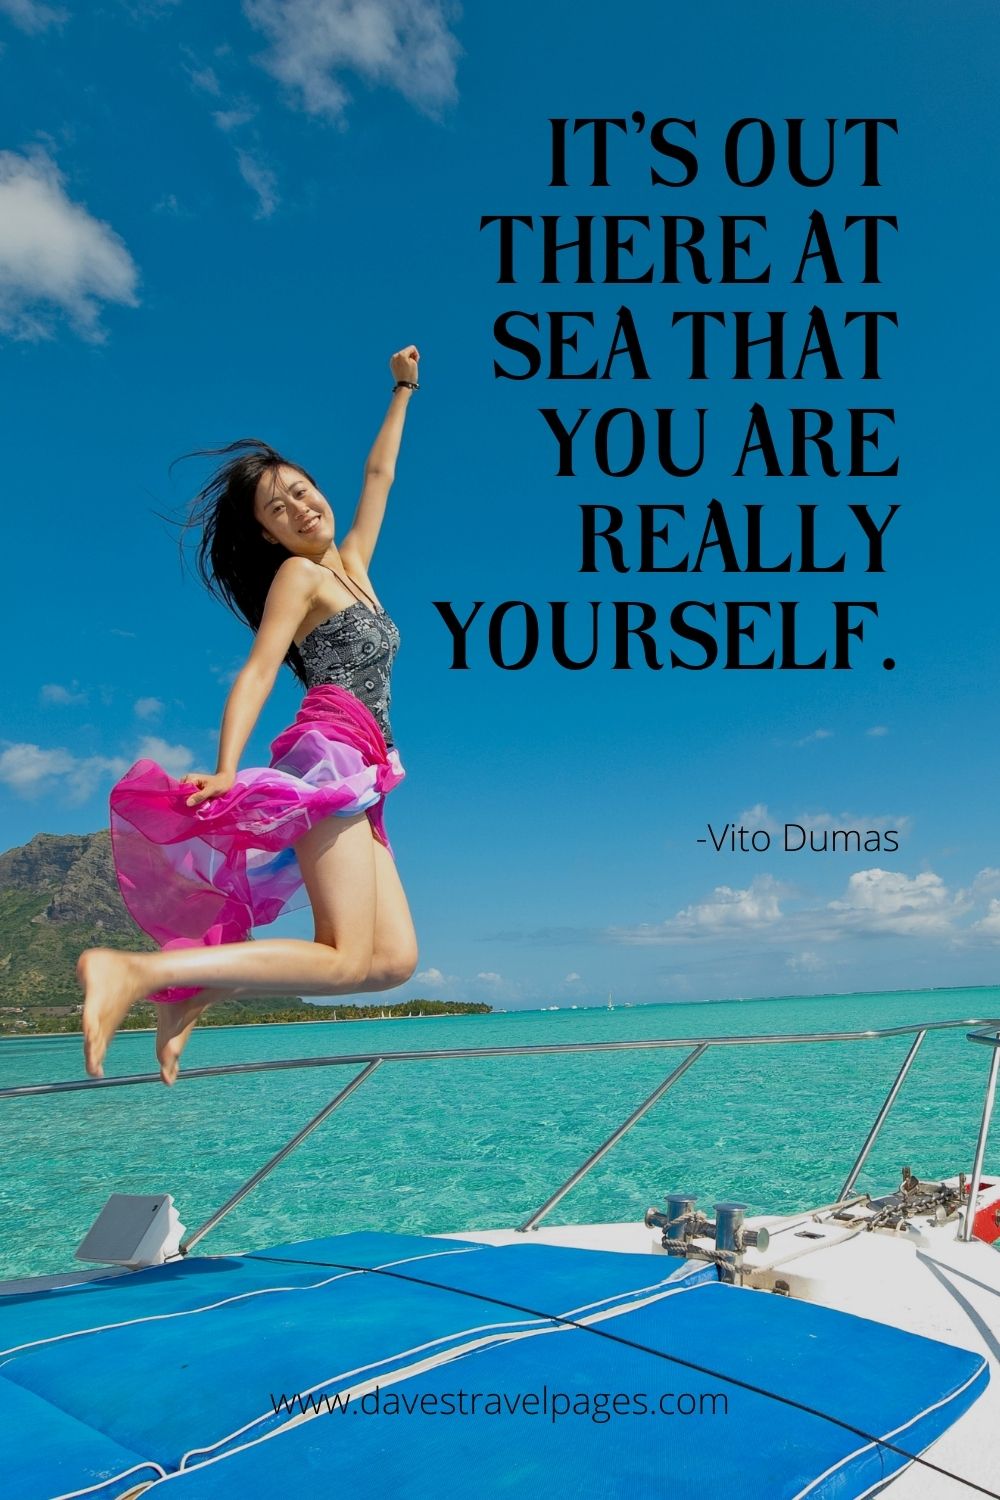 Quotes about sailing and boats: It’s out there at sea that you are really yourself.